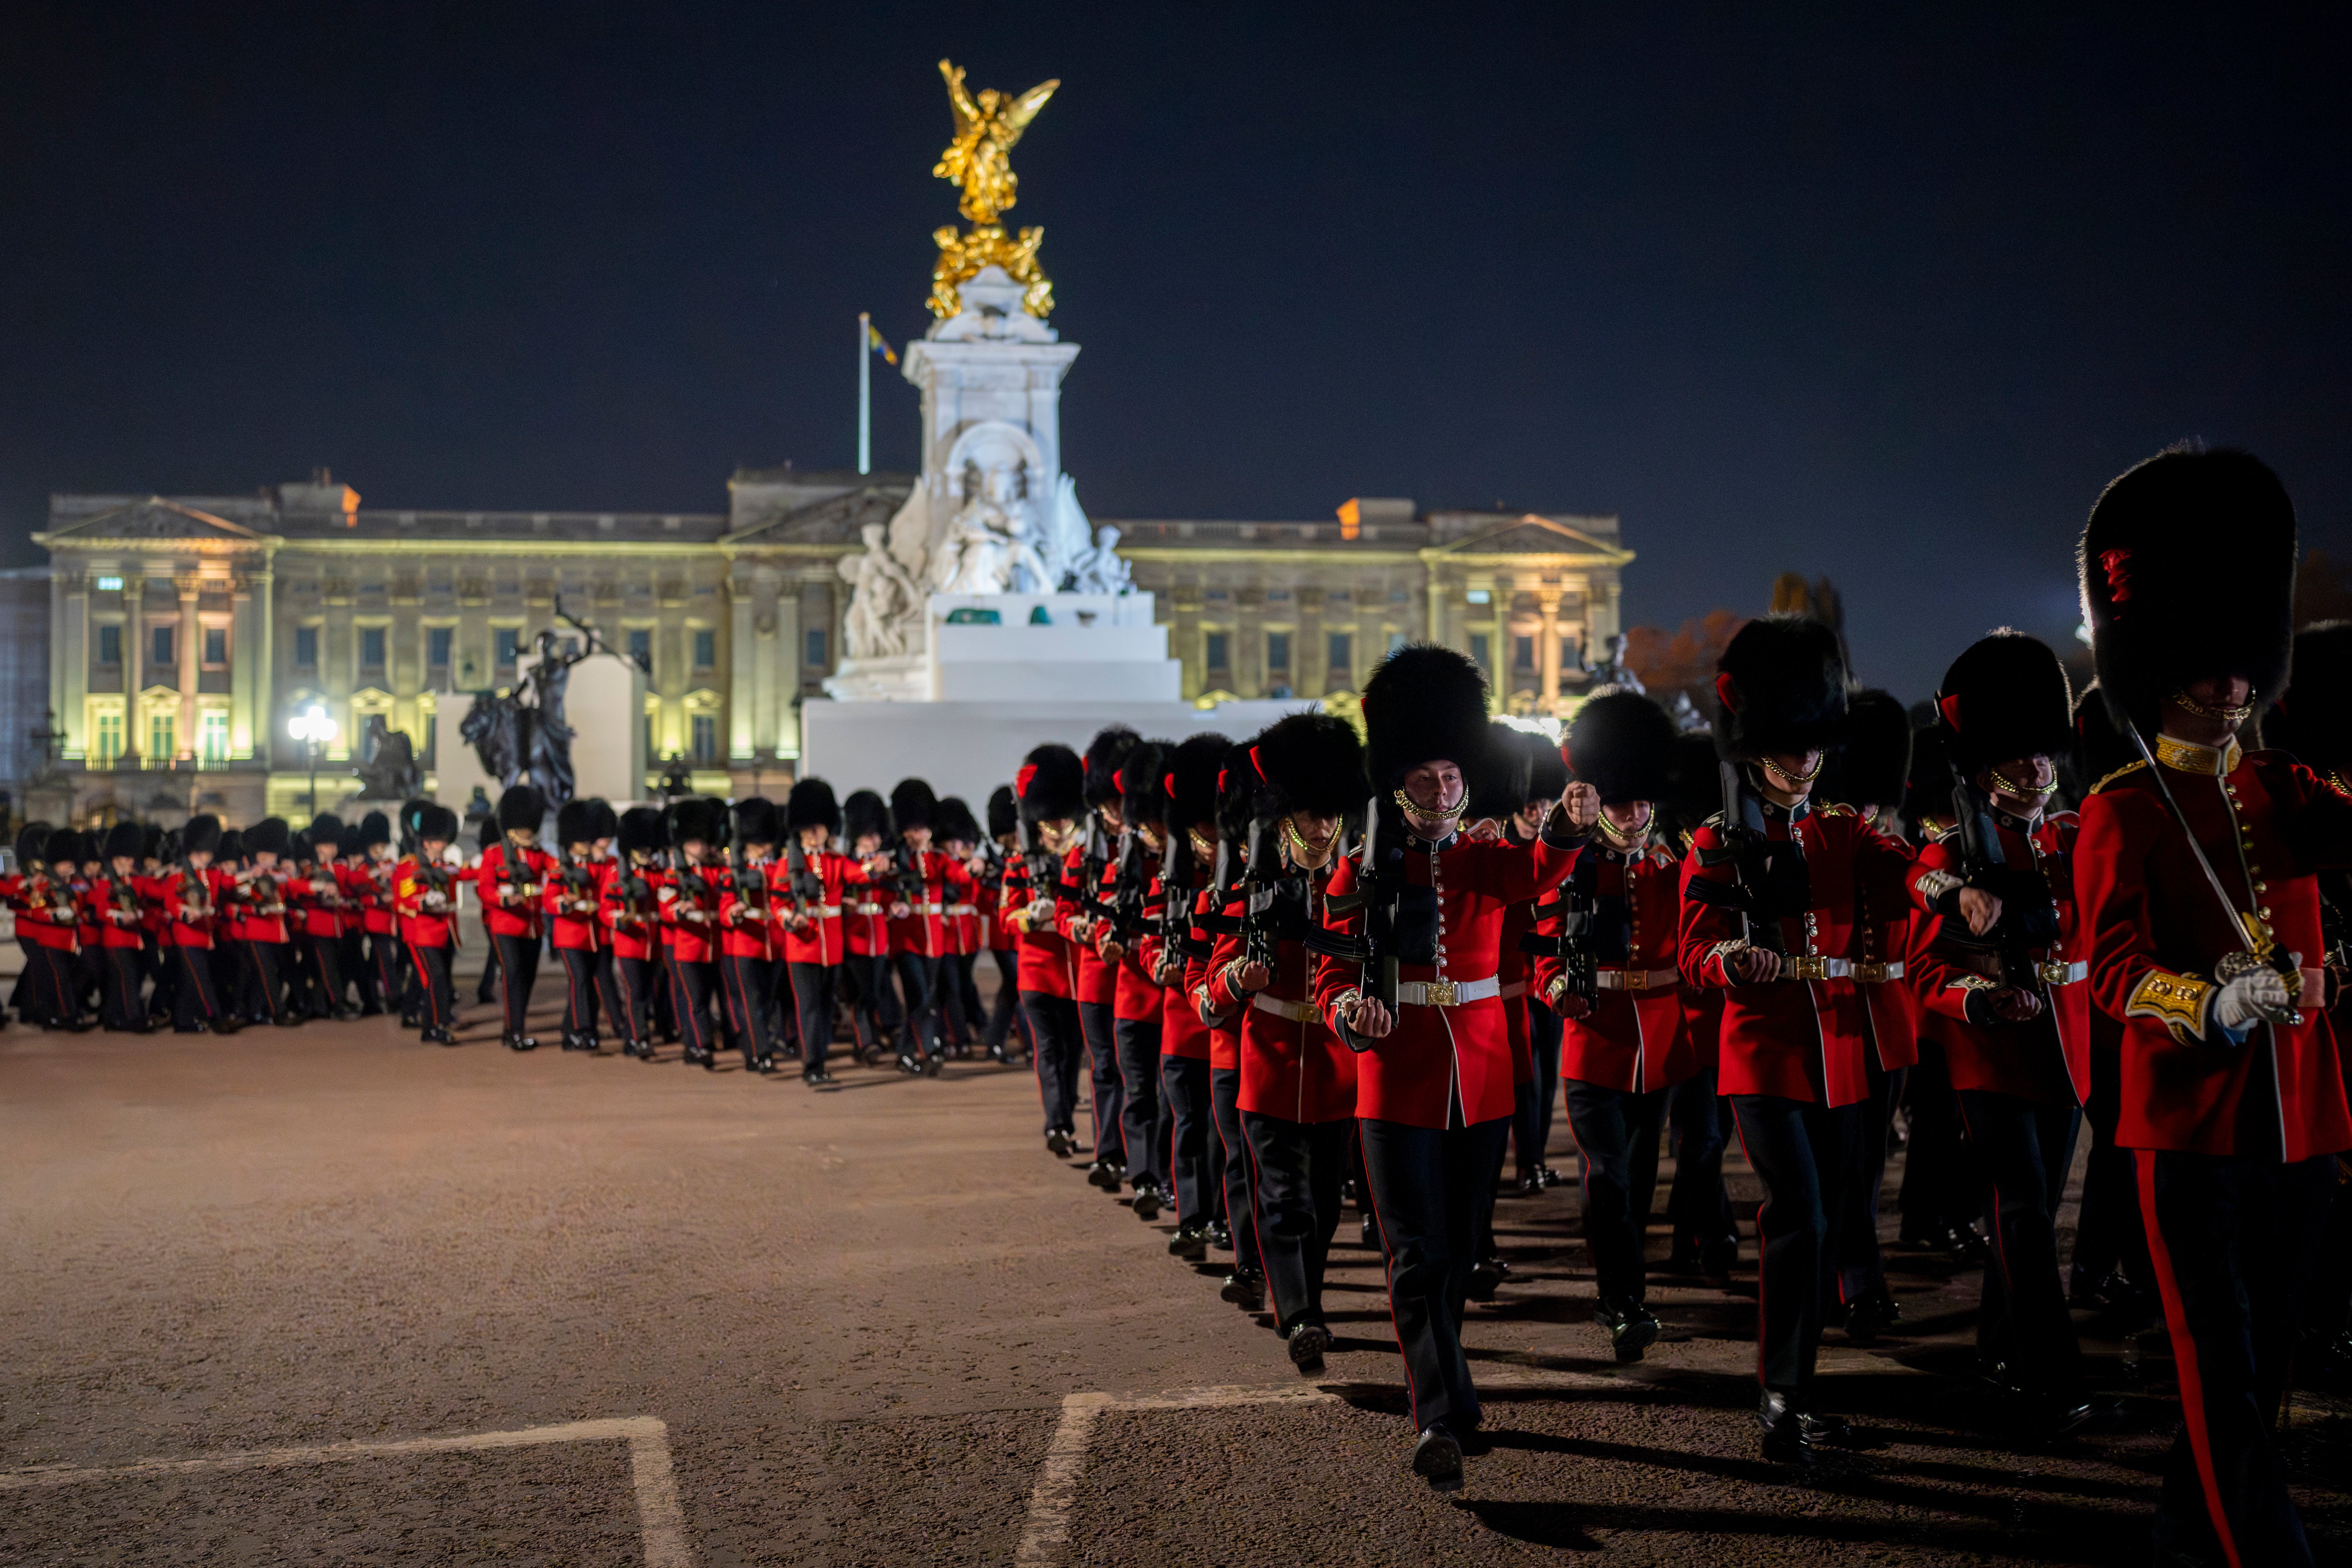 Members of the military march near Buckingham Palace in the coronation rehearsal